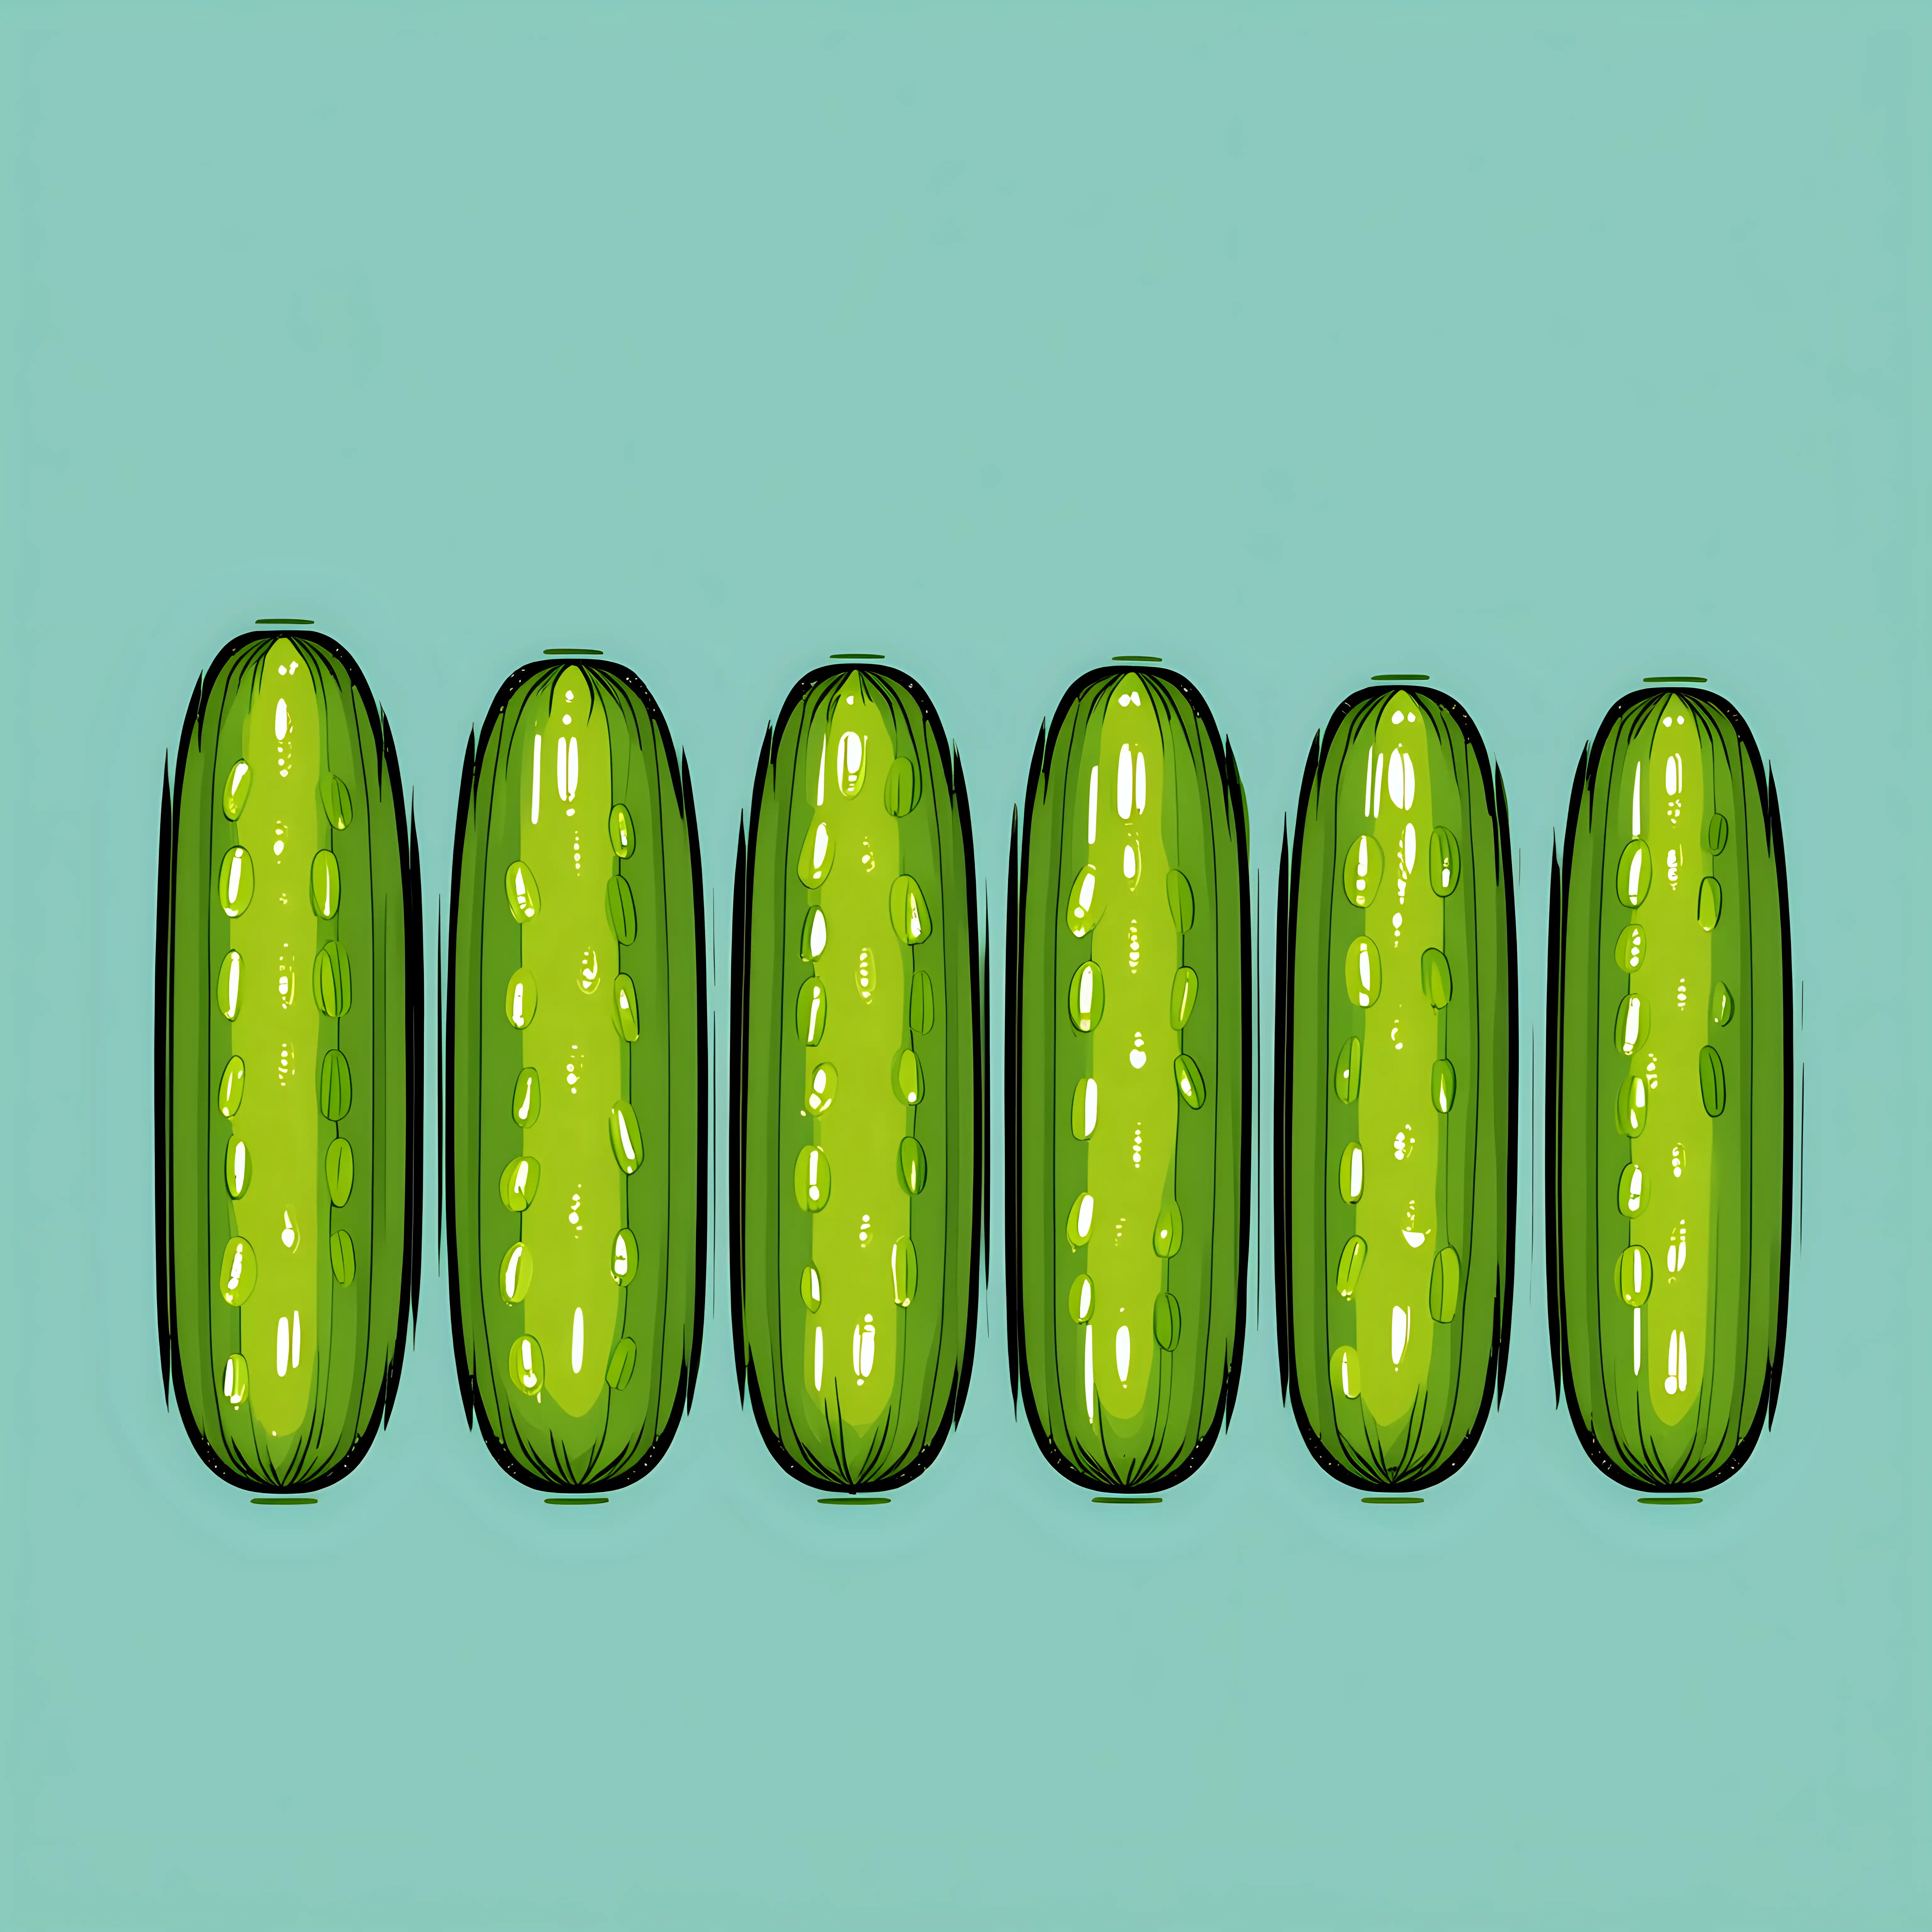 Five Thin Pickles Arranged in a Colorful Line Drawing